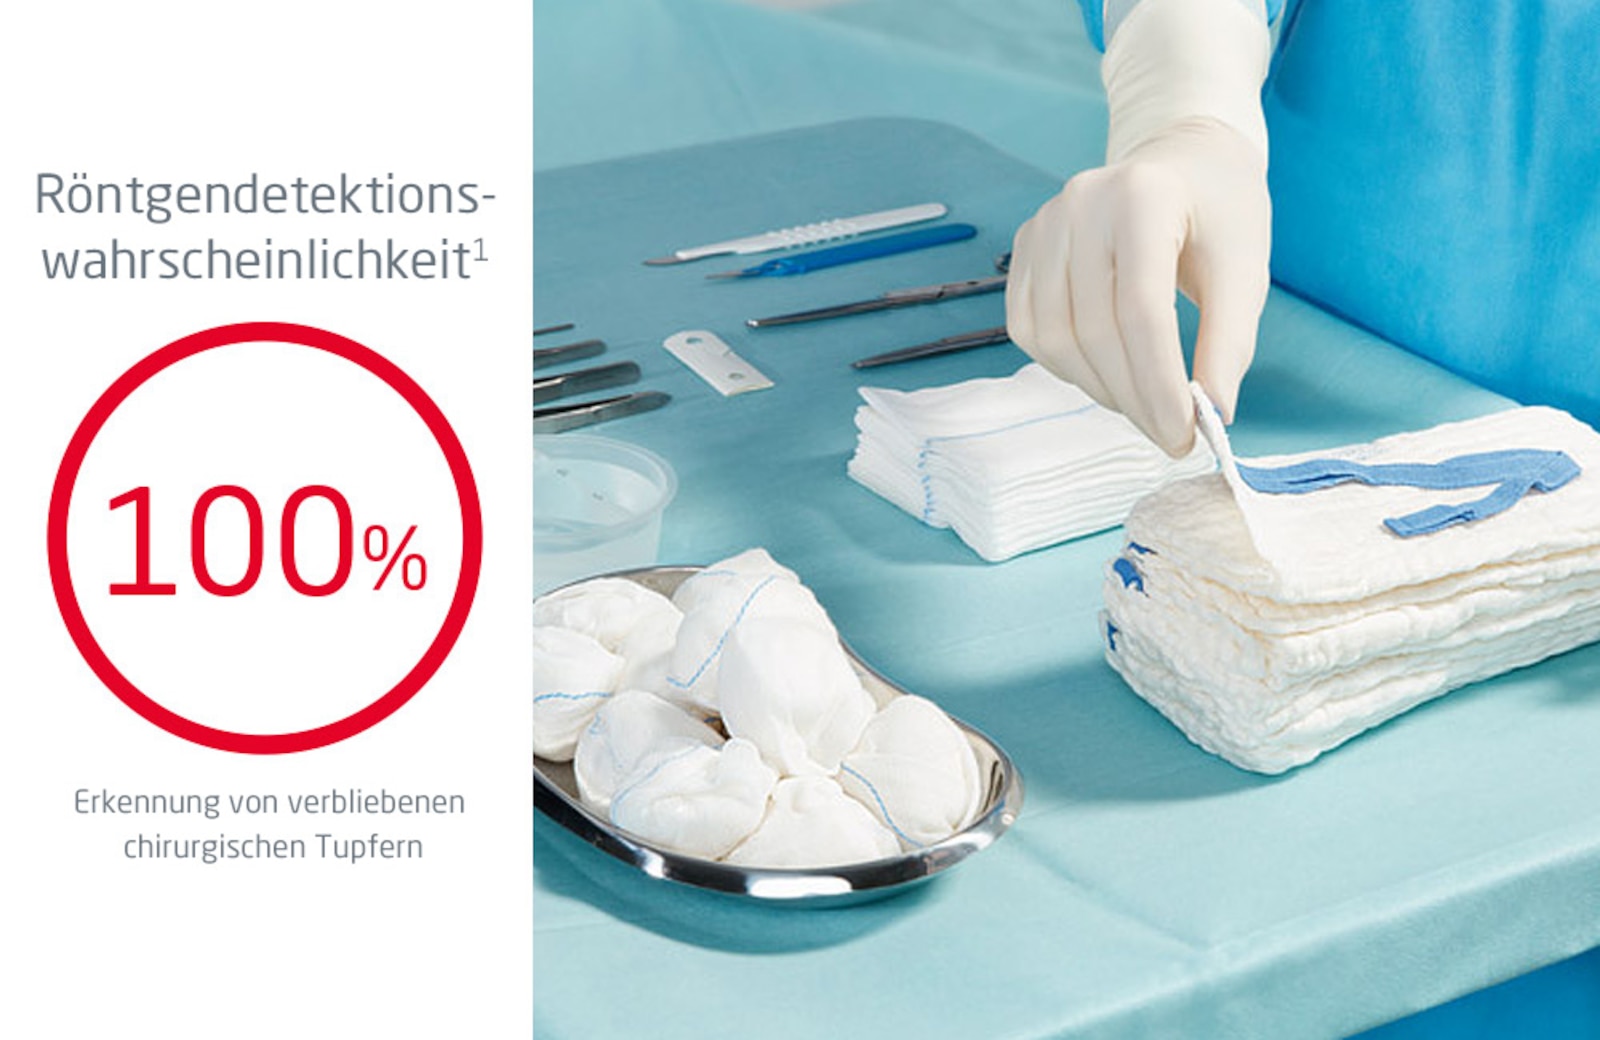 leukoplast-dach-surgical-dressings-sd-cp-detection-probability-1000x650px.jpg                                                                                                                                                                                                                                                                                                                                                                                                                                       